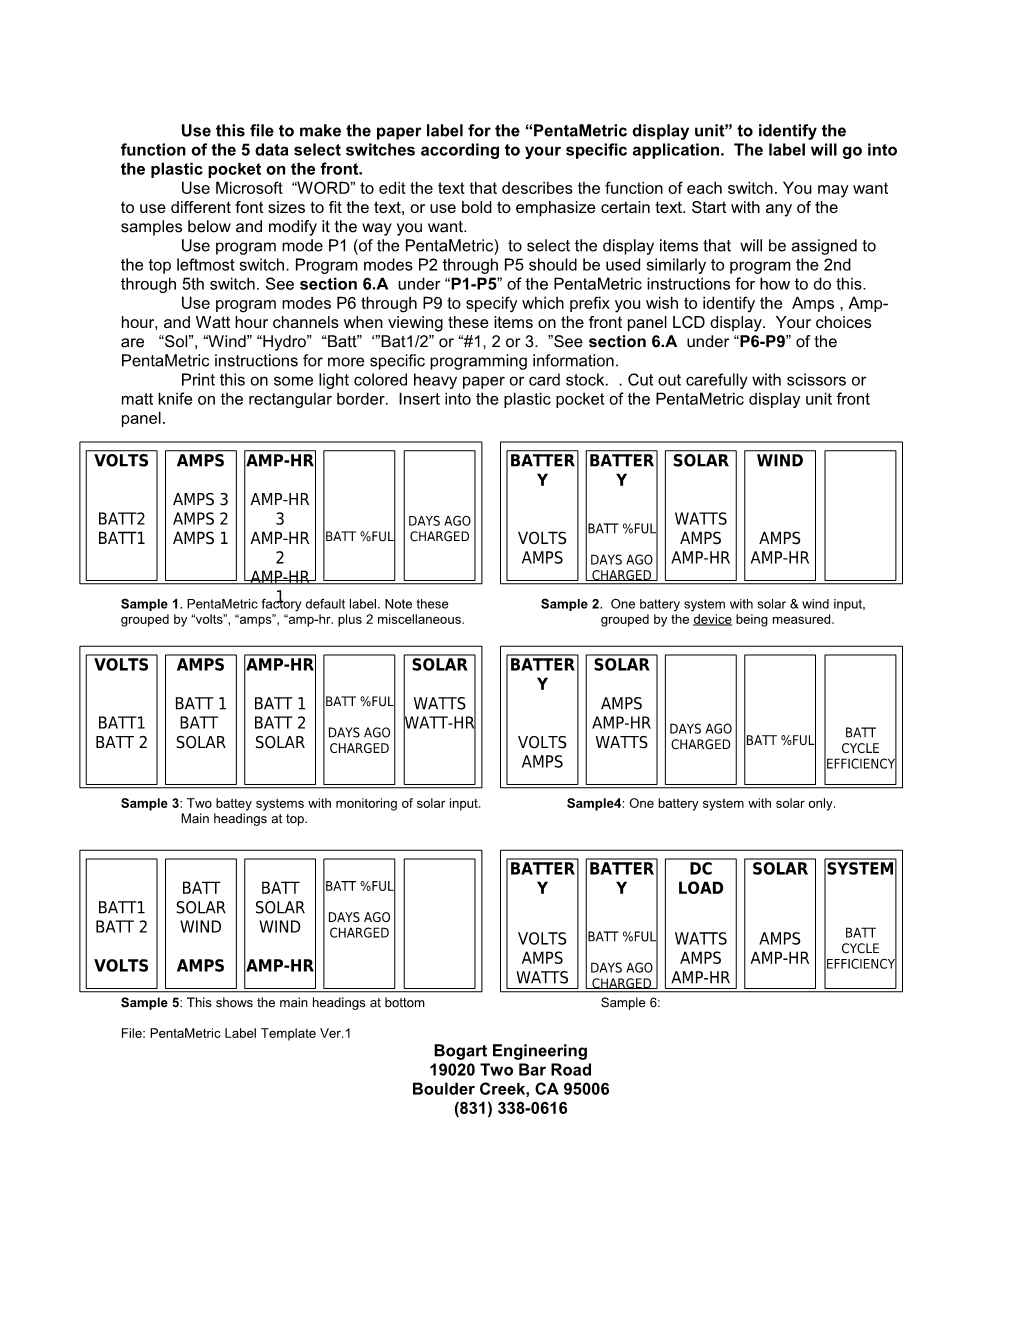 Use This File to Make the Paper Label for the Pentametric Display Unit to Identify The